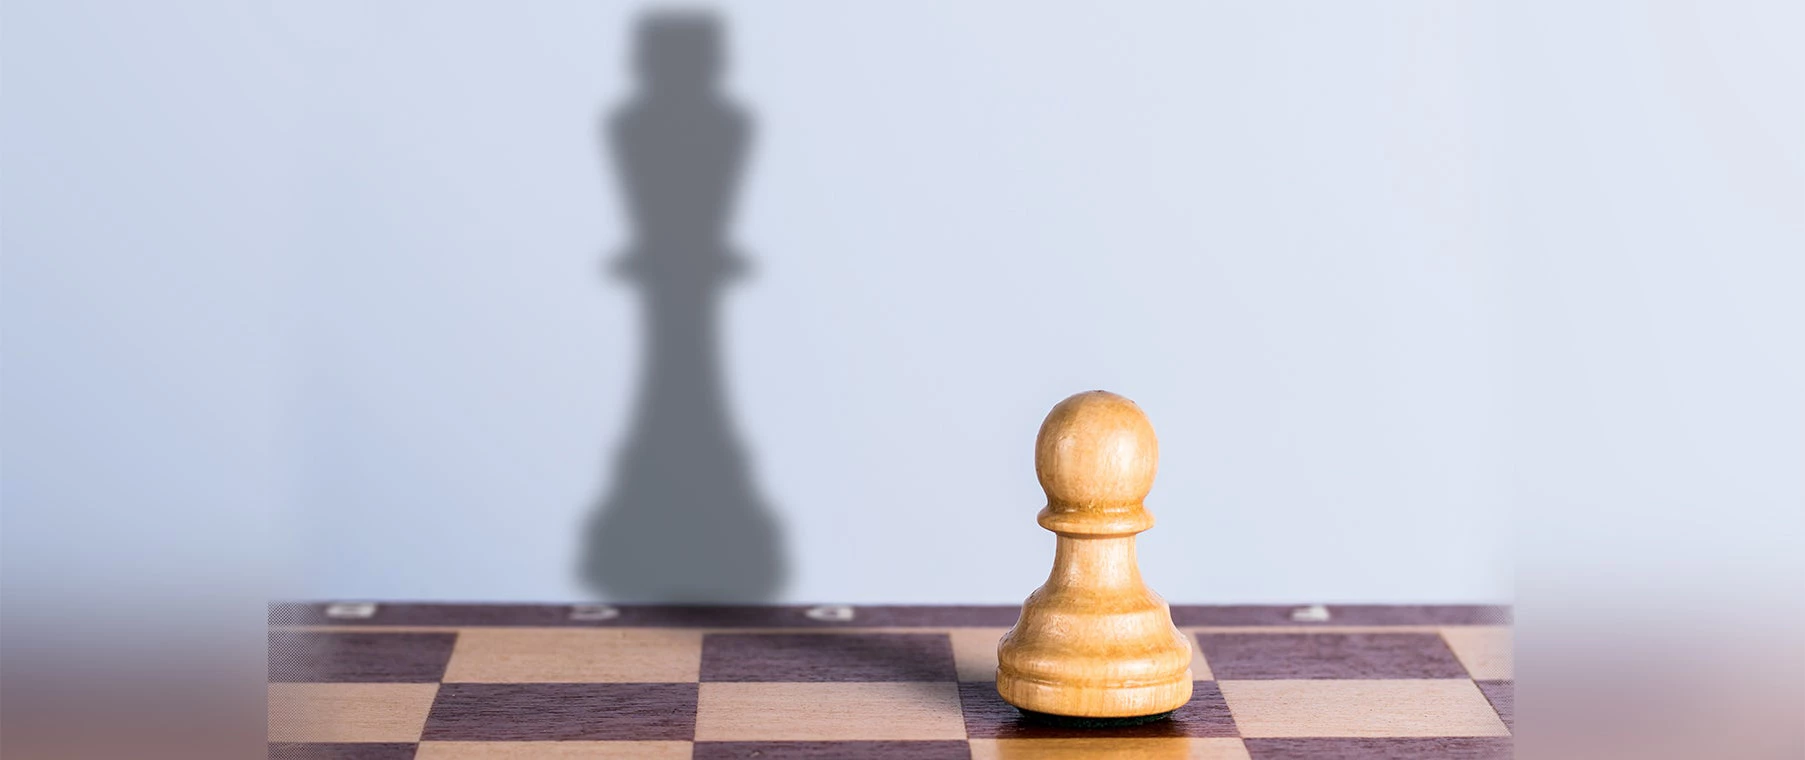 A chess board depicting shadow banking concept | © shutterstock.com